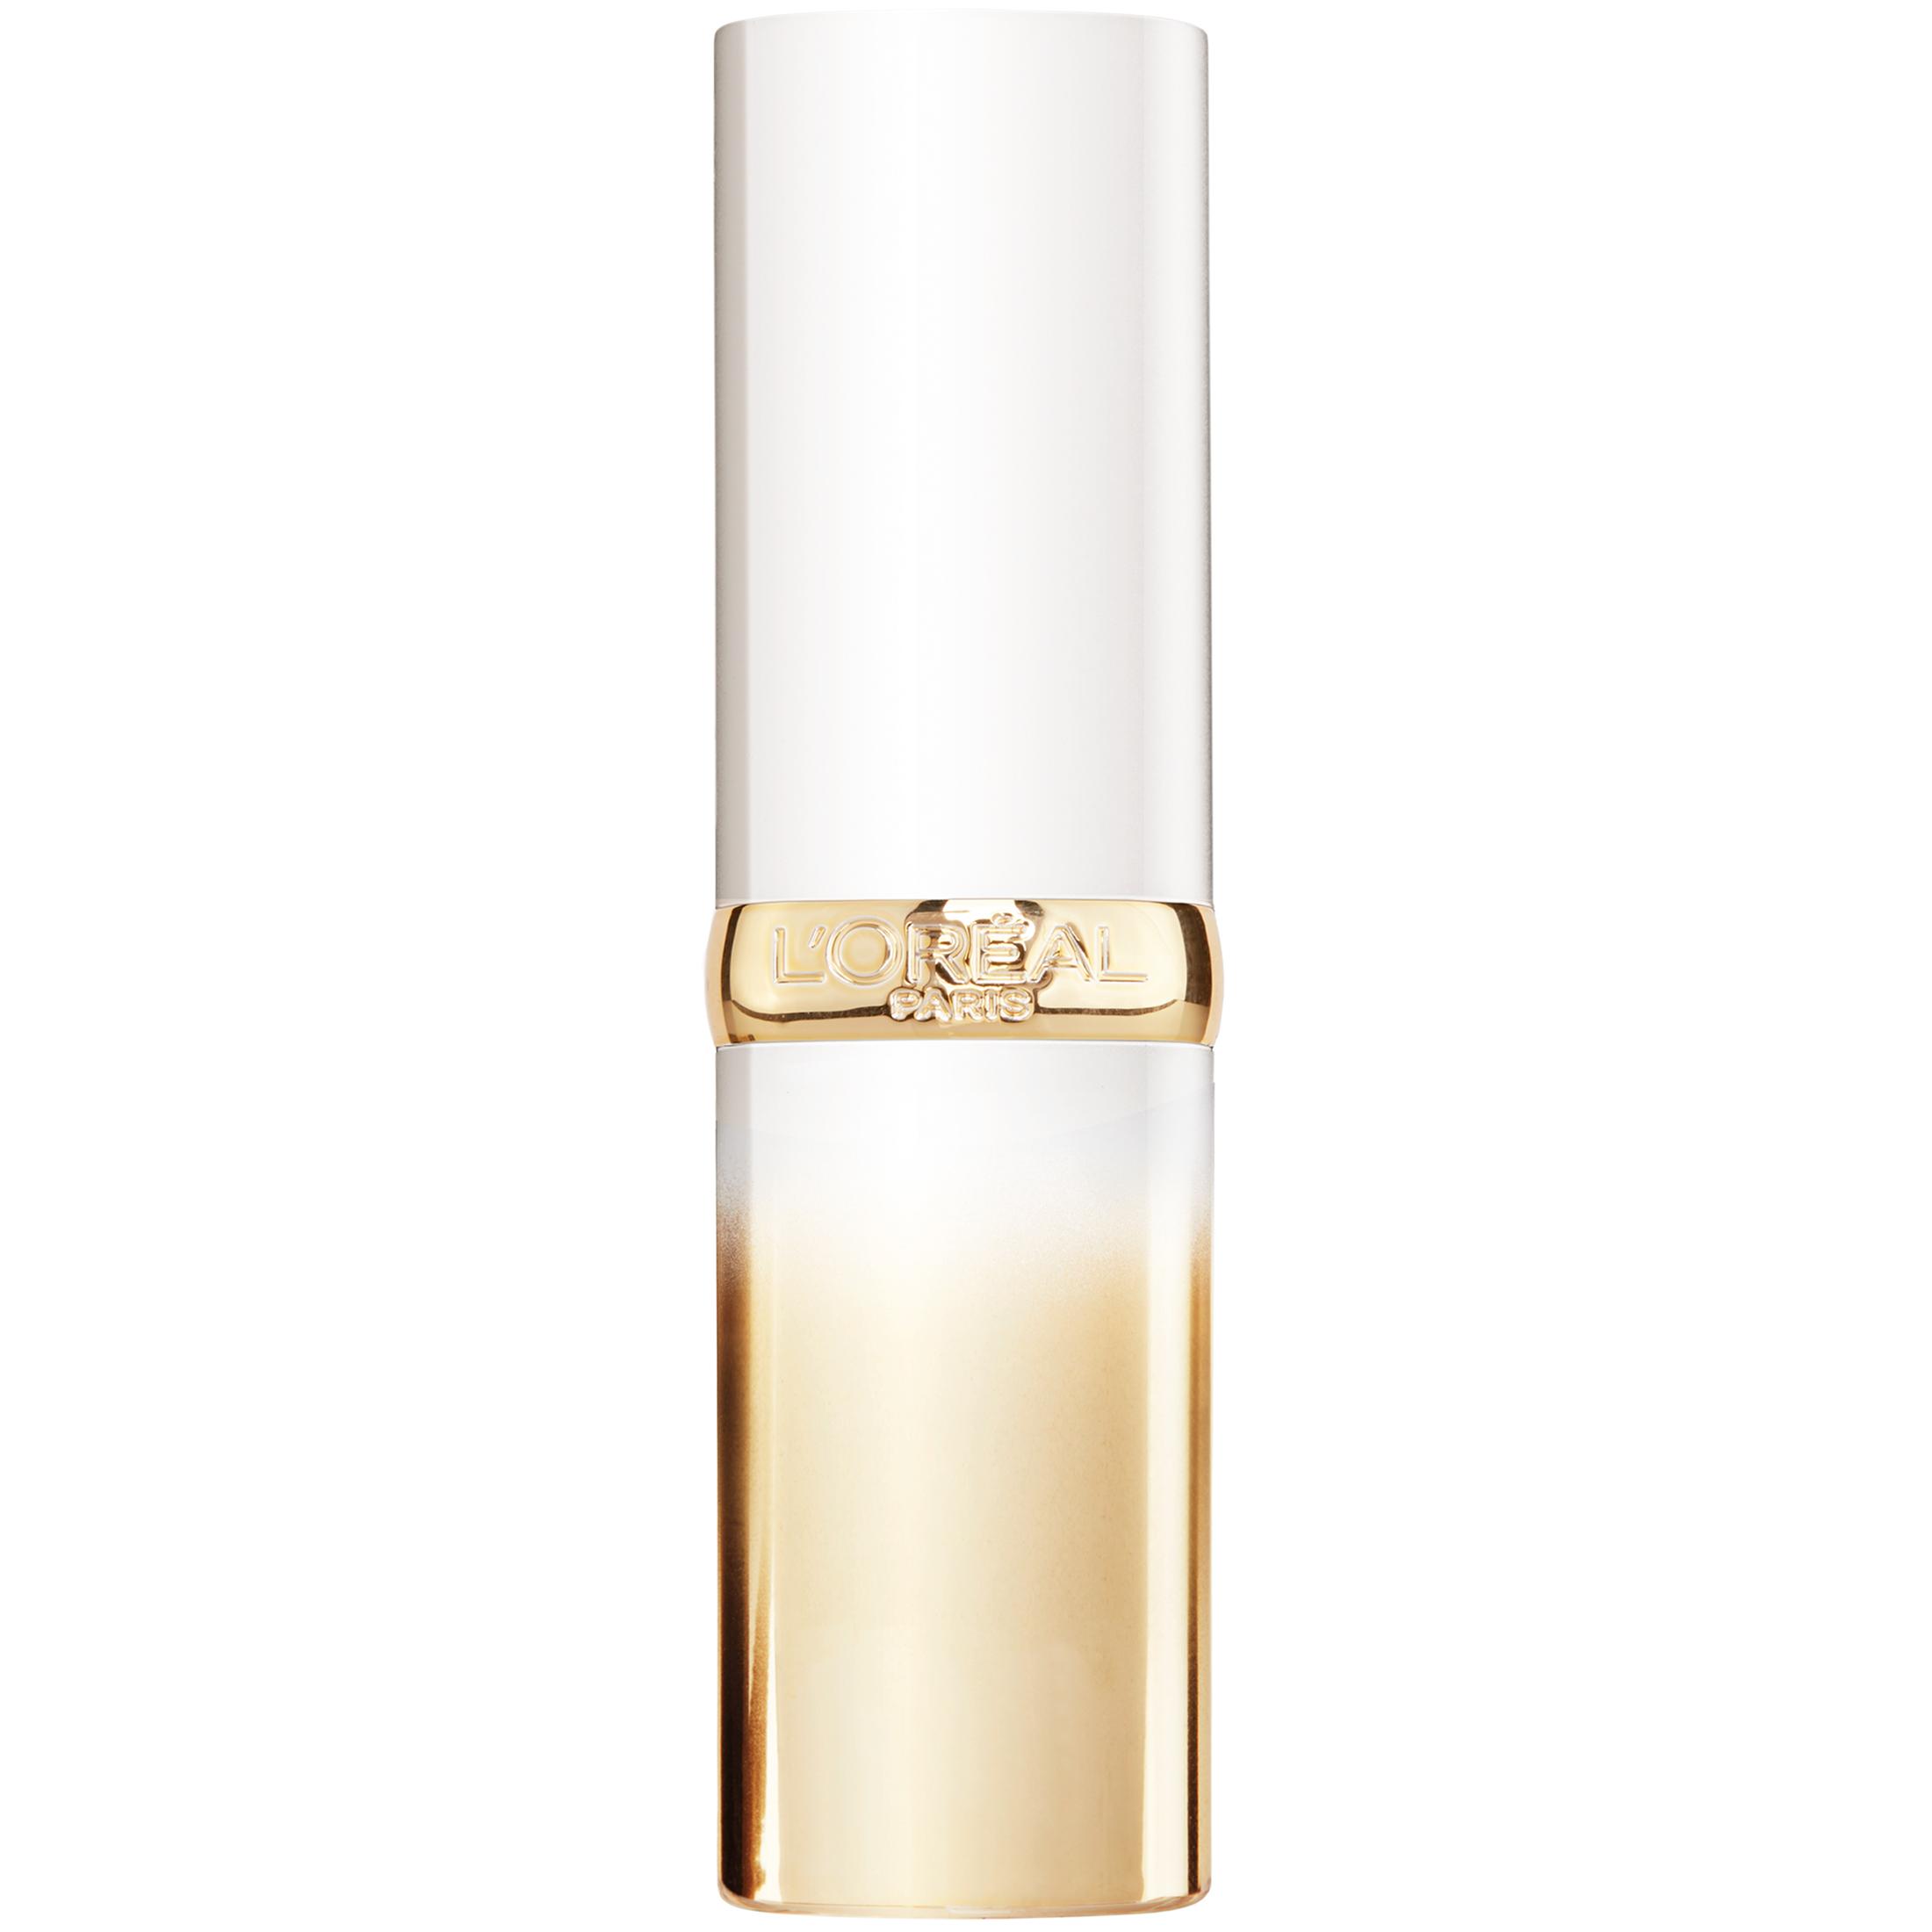 L'Oreal Paris Age Perfect Satin Lipstick, Glowing Nude - image 4 of 12